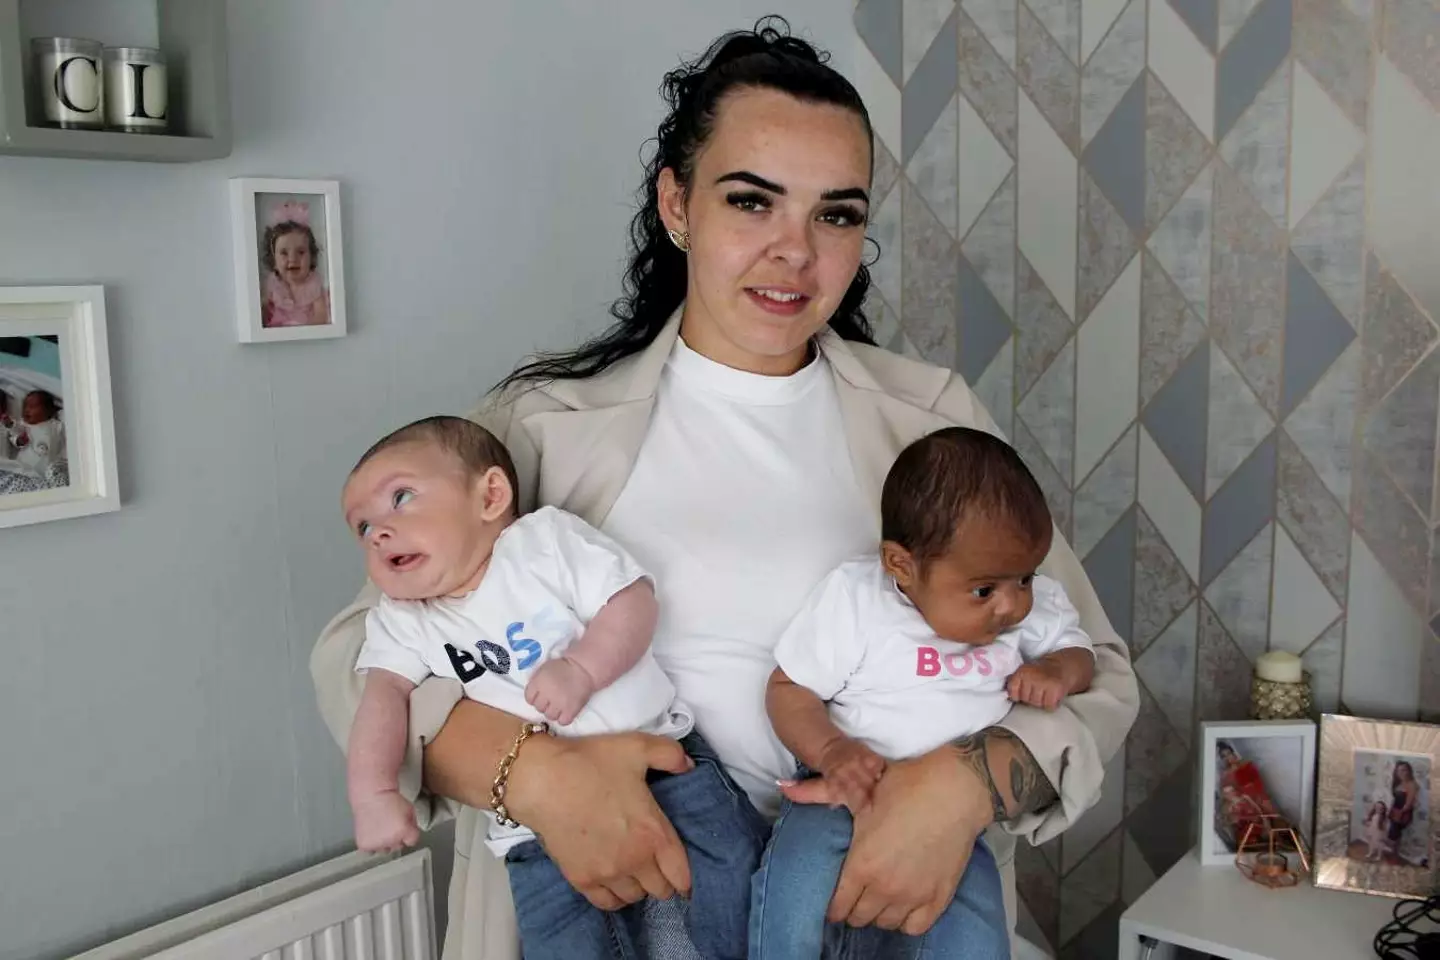 A mum was left gobsmacked when she gave birth to million-to-one black and white twins.